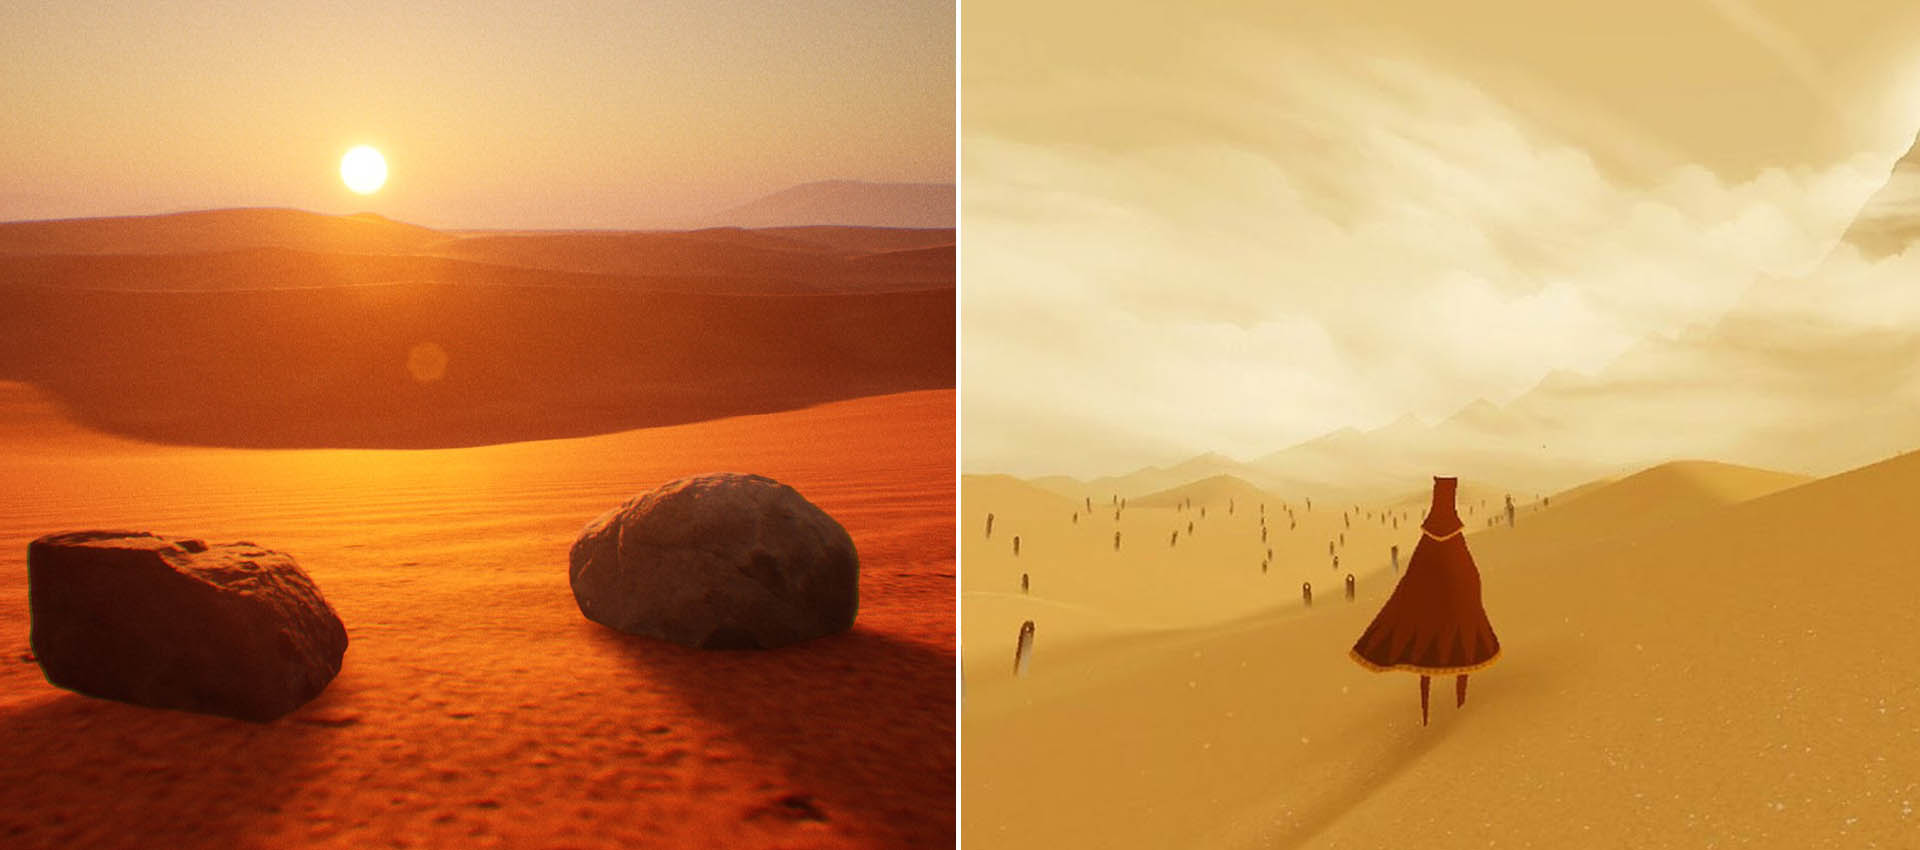 A "Journey" inspired game where you play as a rock launches on STEAM today, yes really